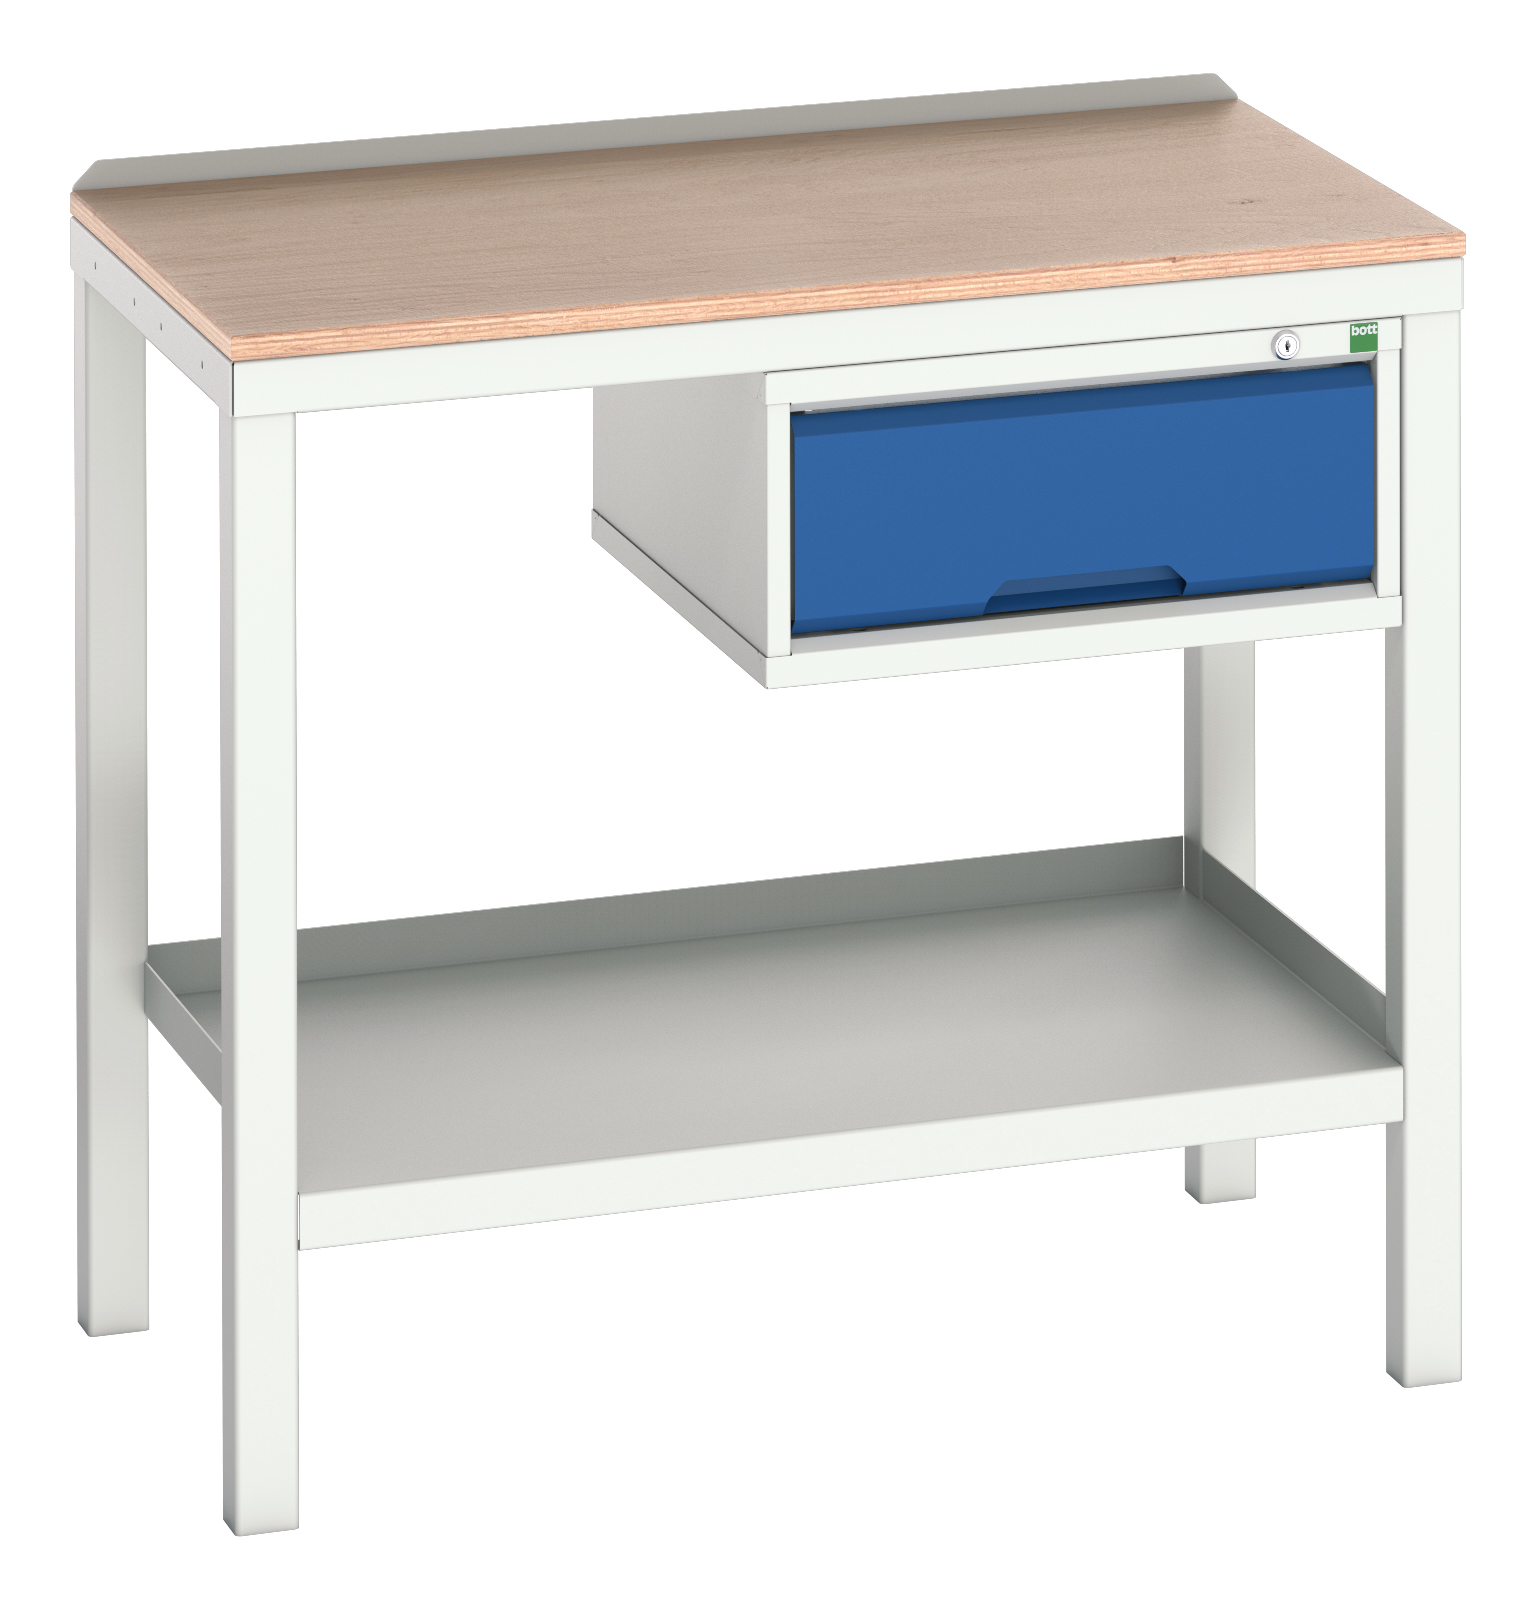 Bott Verso Welded Bench With 1 Drawer Cabinet - 16922601.11